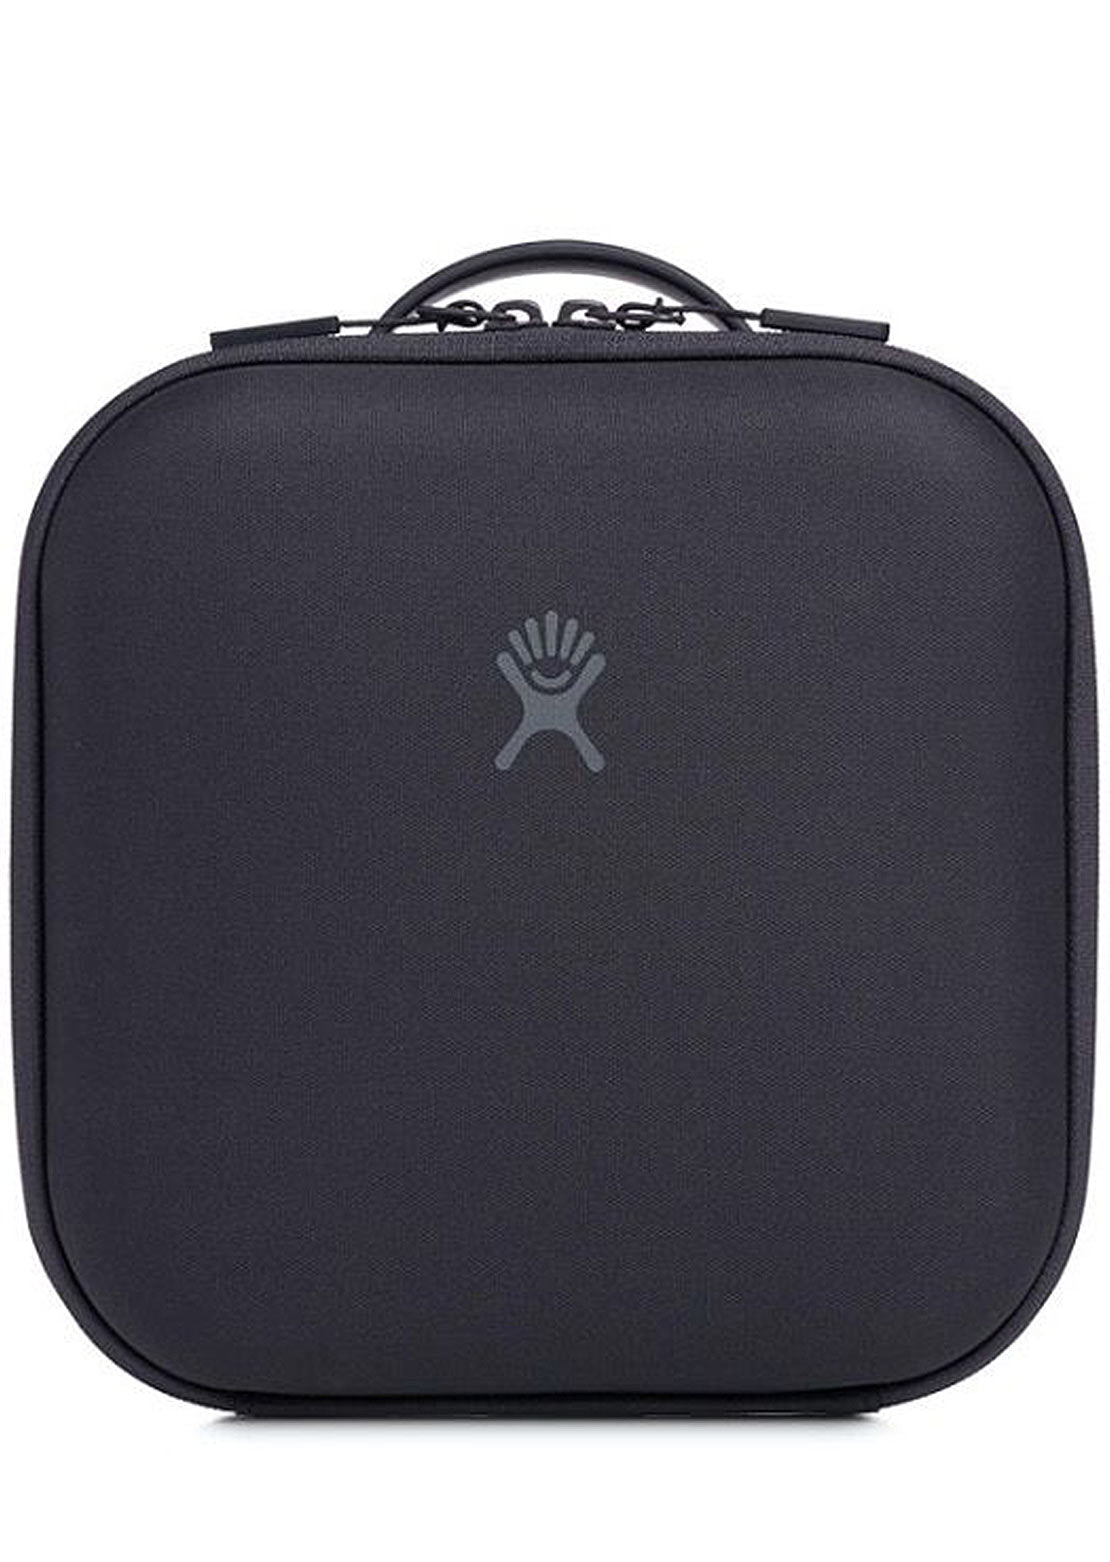 Hydro Flask Small Insulated Lunch Box Blackberry